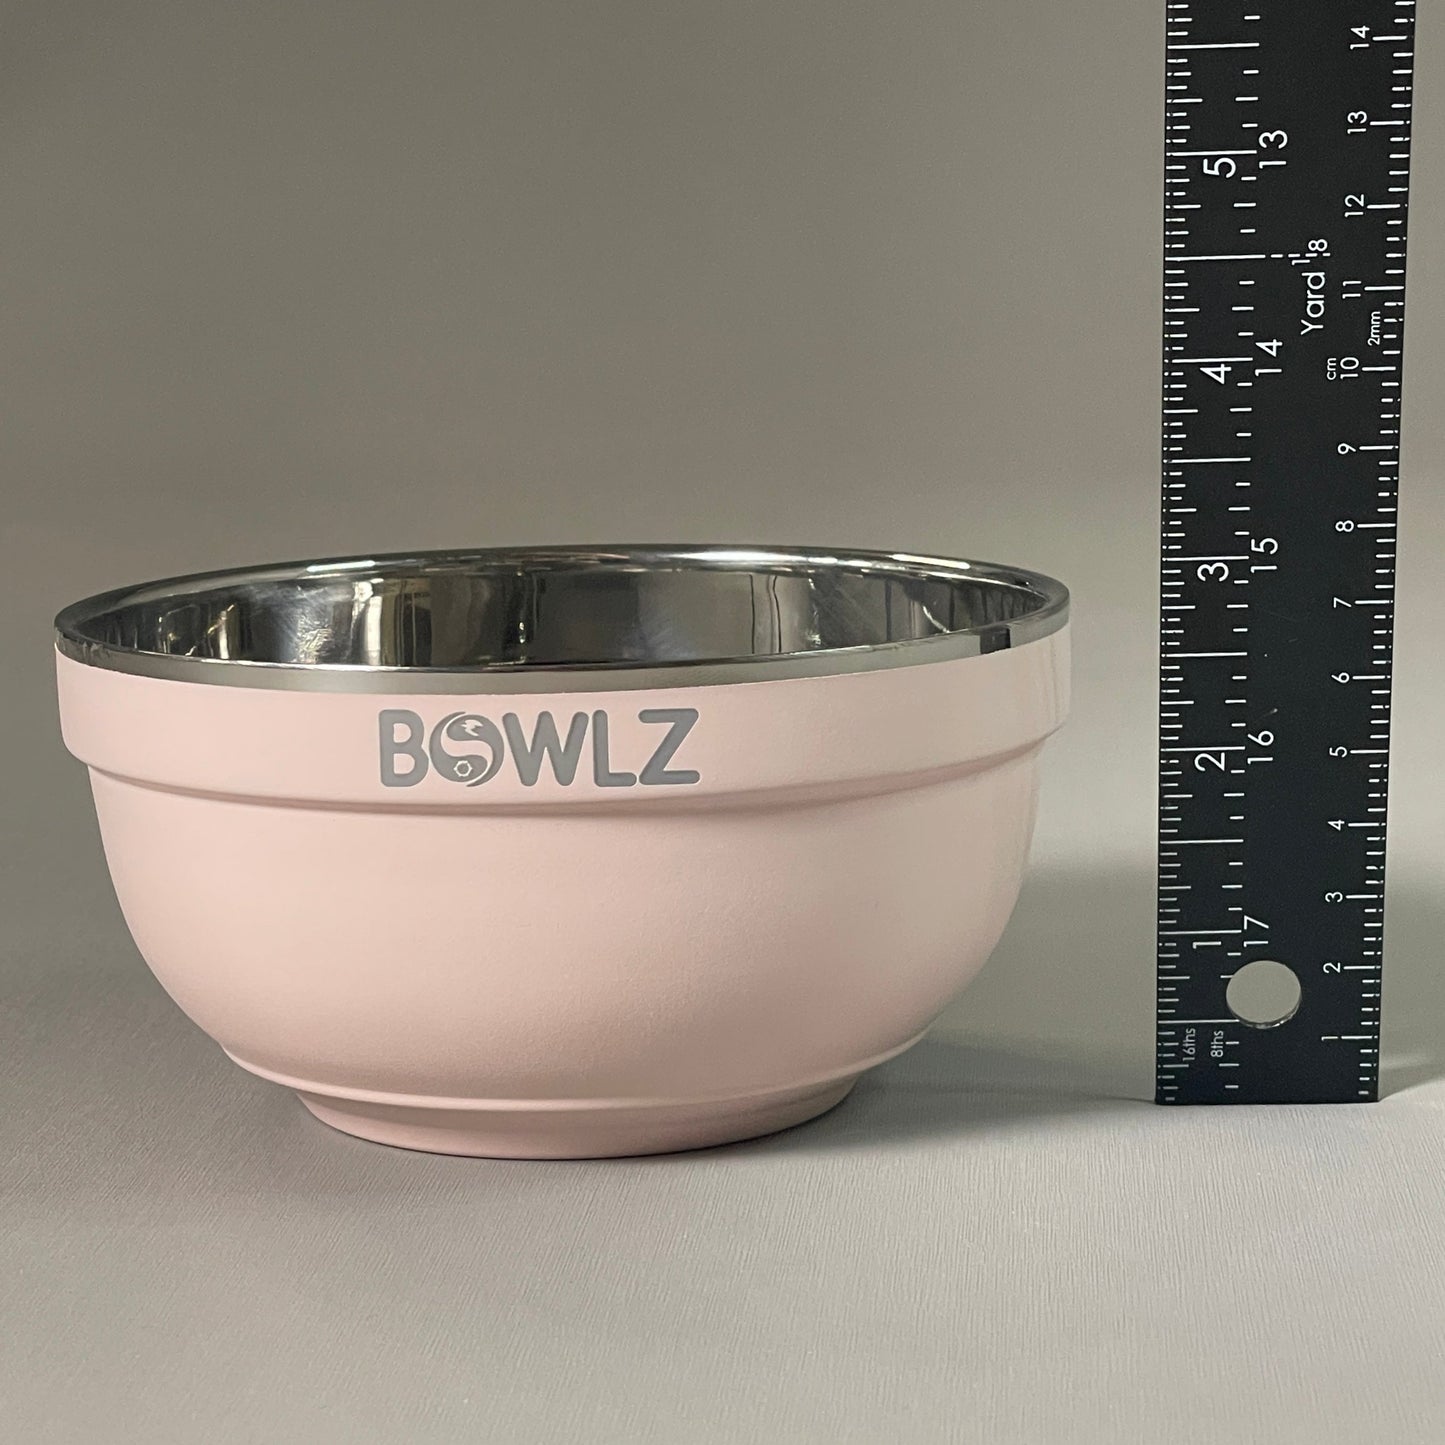 BOWLZ Set of 6 Stainless Steel Insulated Bowl 16 oz Pink (New) ~Keeps Ice Cream Cold!~